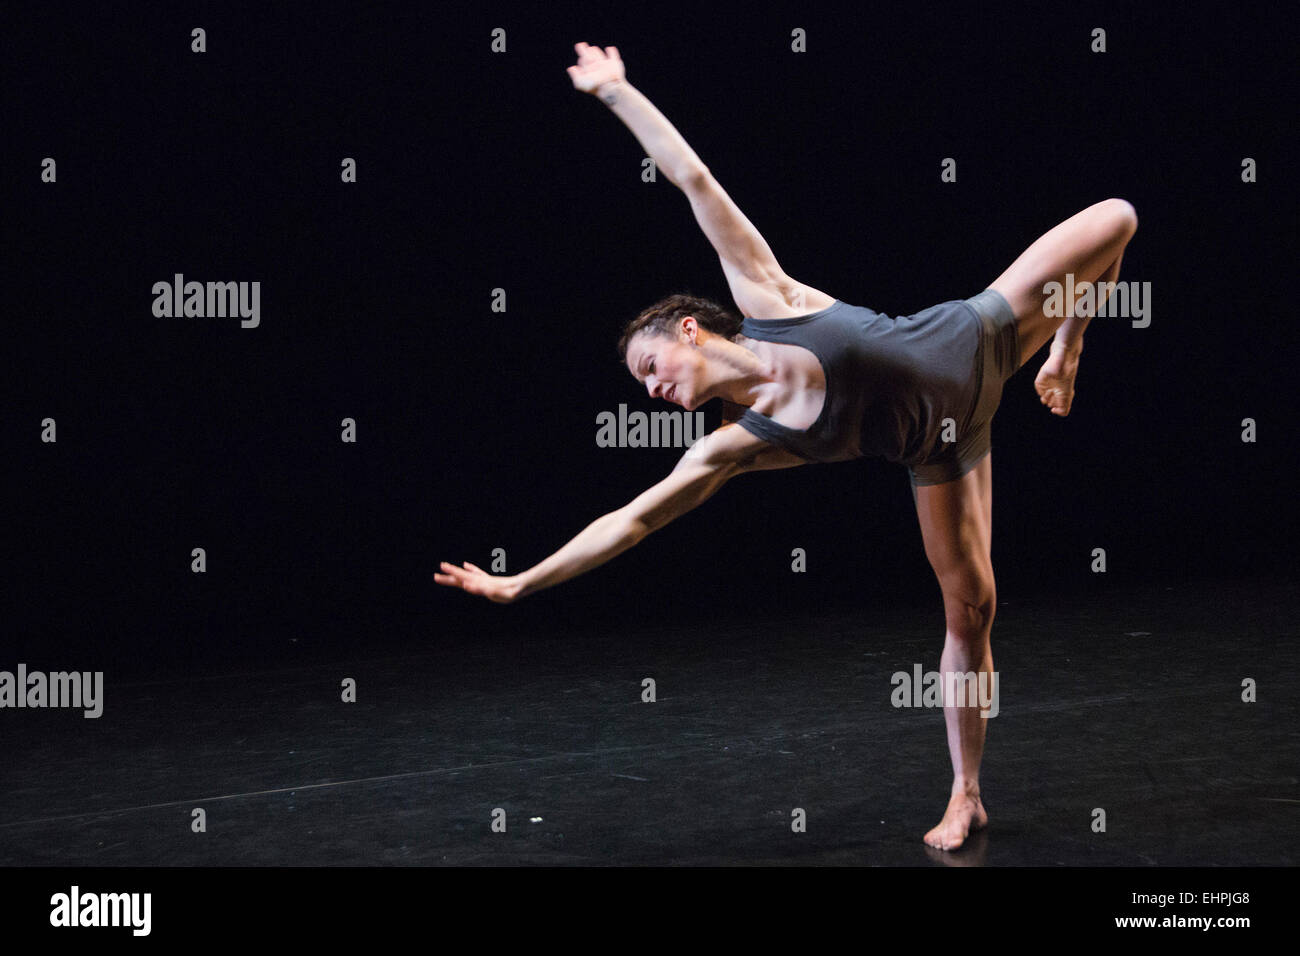 © Licensed to London News Pictures. 10/03/2015. London, England. Laurel Dalley-Smith performing. The Yorke Dance Project presents 'Lingua Franca', the first new work in a decade from choreographer Robert Cohan CBE, on 10 March 2015 at the Lilian Baylis Studio and as part of Robert Cohan's 90th birthday at The Place on 27 March. Lingua Franca is part of the company's spring programme 'Figure Ground 2015'. Dancers: Jonathan Goddard, Phil Sanger, Laurel Dalley-Smith and Yolande Yorke-Edgell. Stock Photo